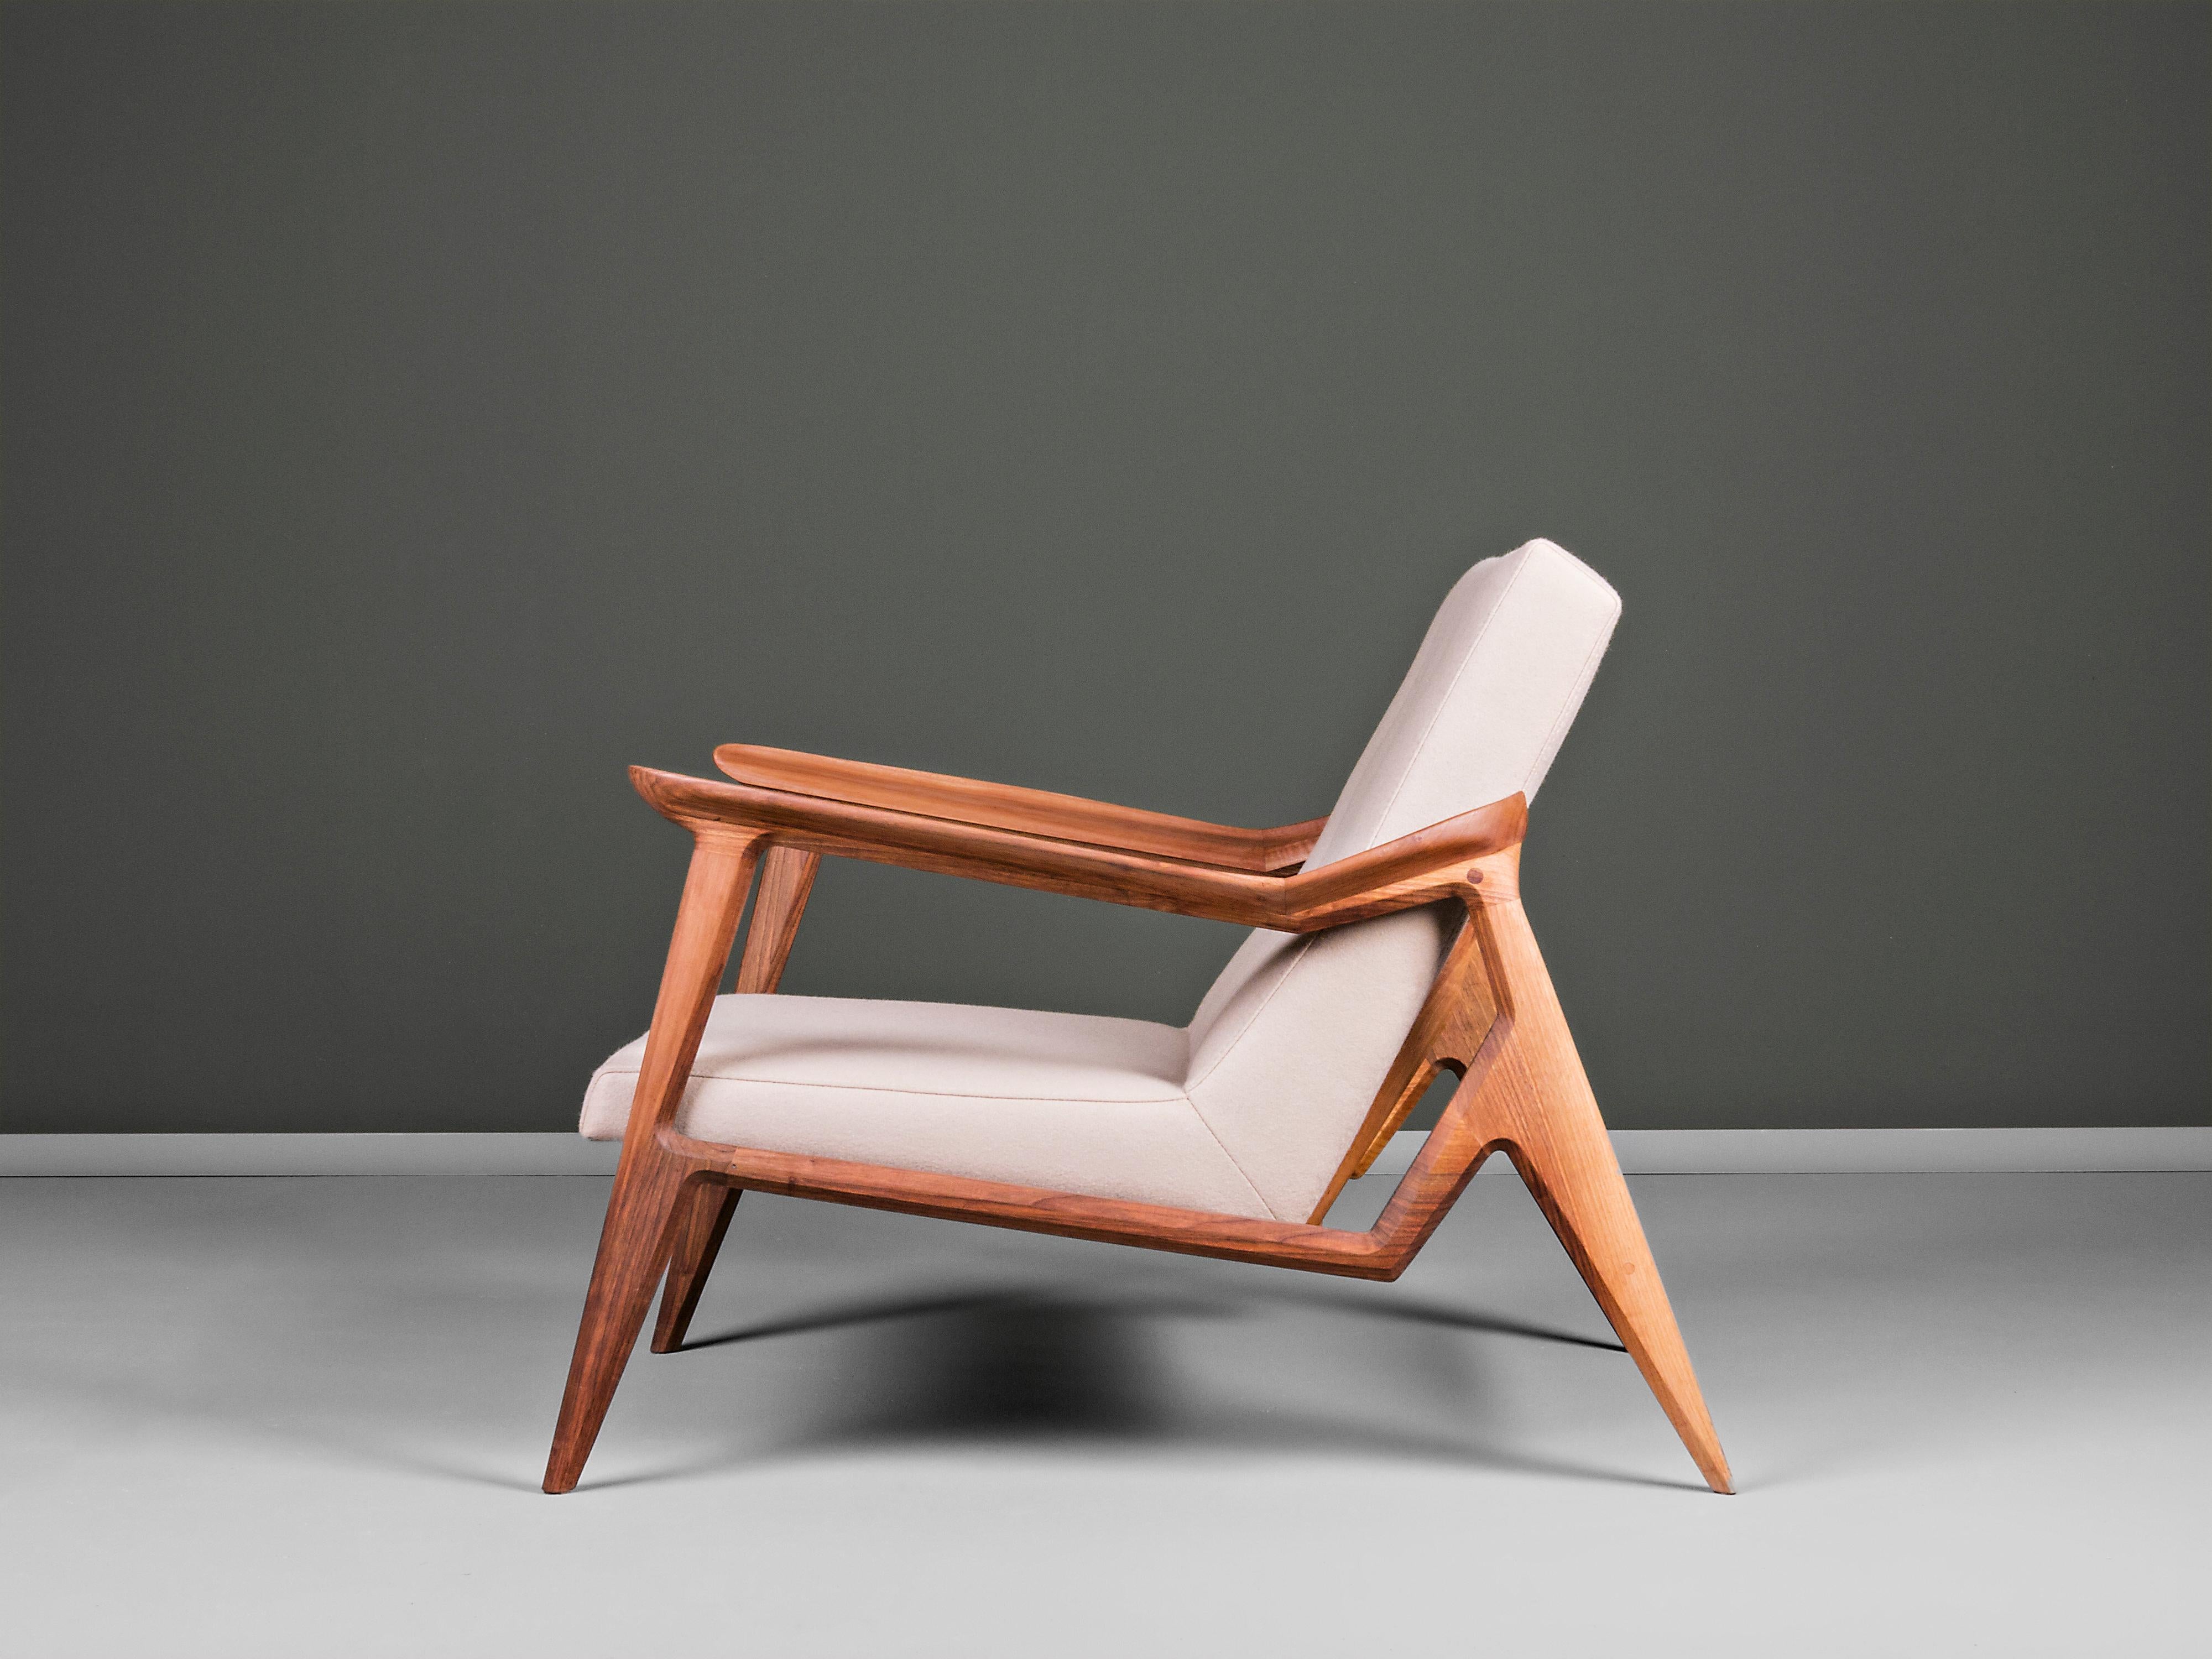 Lipa armchair is characterized by exceptional lightness, transparency and tenderness. Hence the name of the collection by the type of the tree linden-Lipa, which is exceptionally soft and gentle wood. The characteristic of this armchair is the